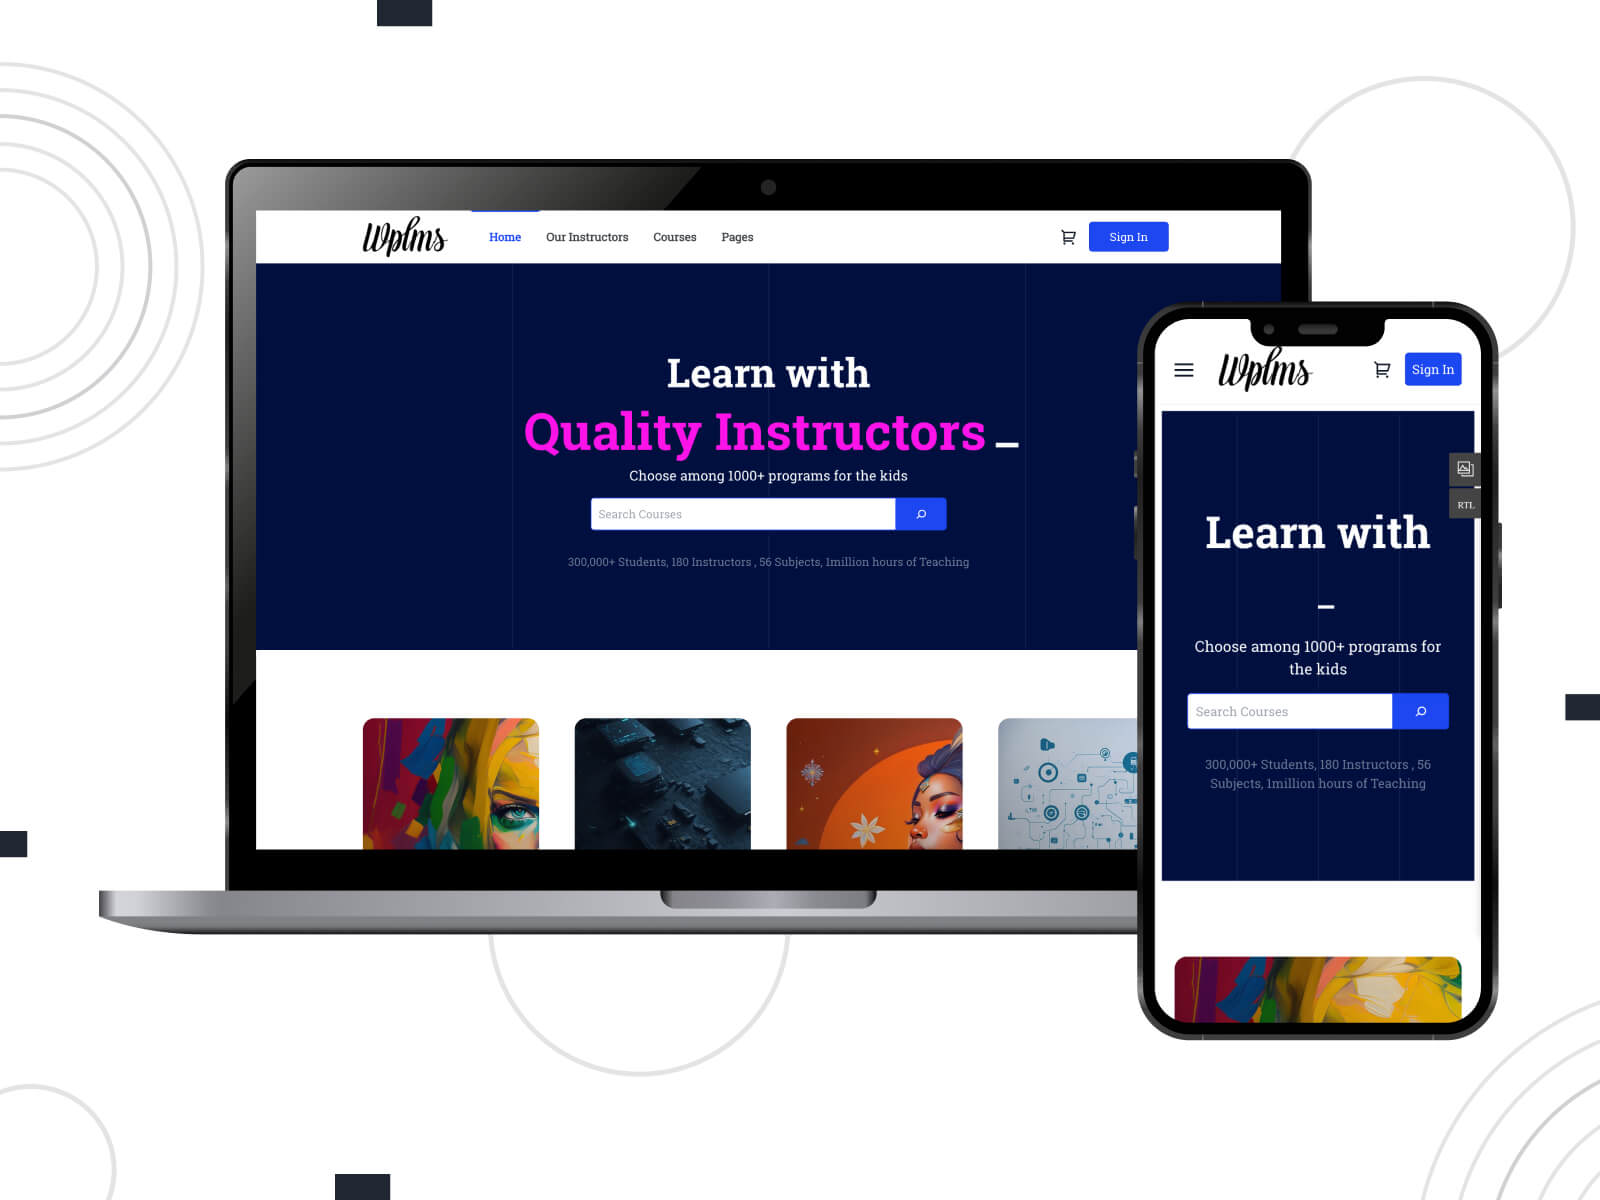 Image of WPLMS - dark, crisp, one of the best WordPress themes, it boasts a clean and minimalist design for sleek website aesthetics in chocolate, midnight blue, and medium violet red color combination.